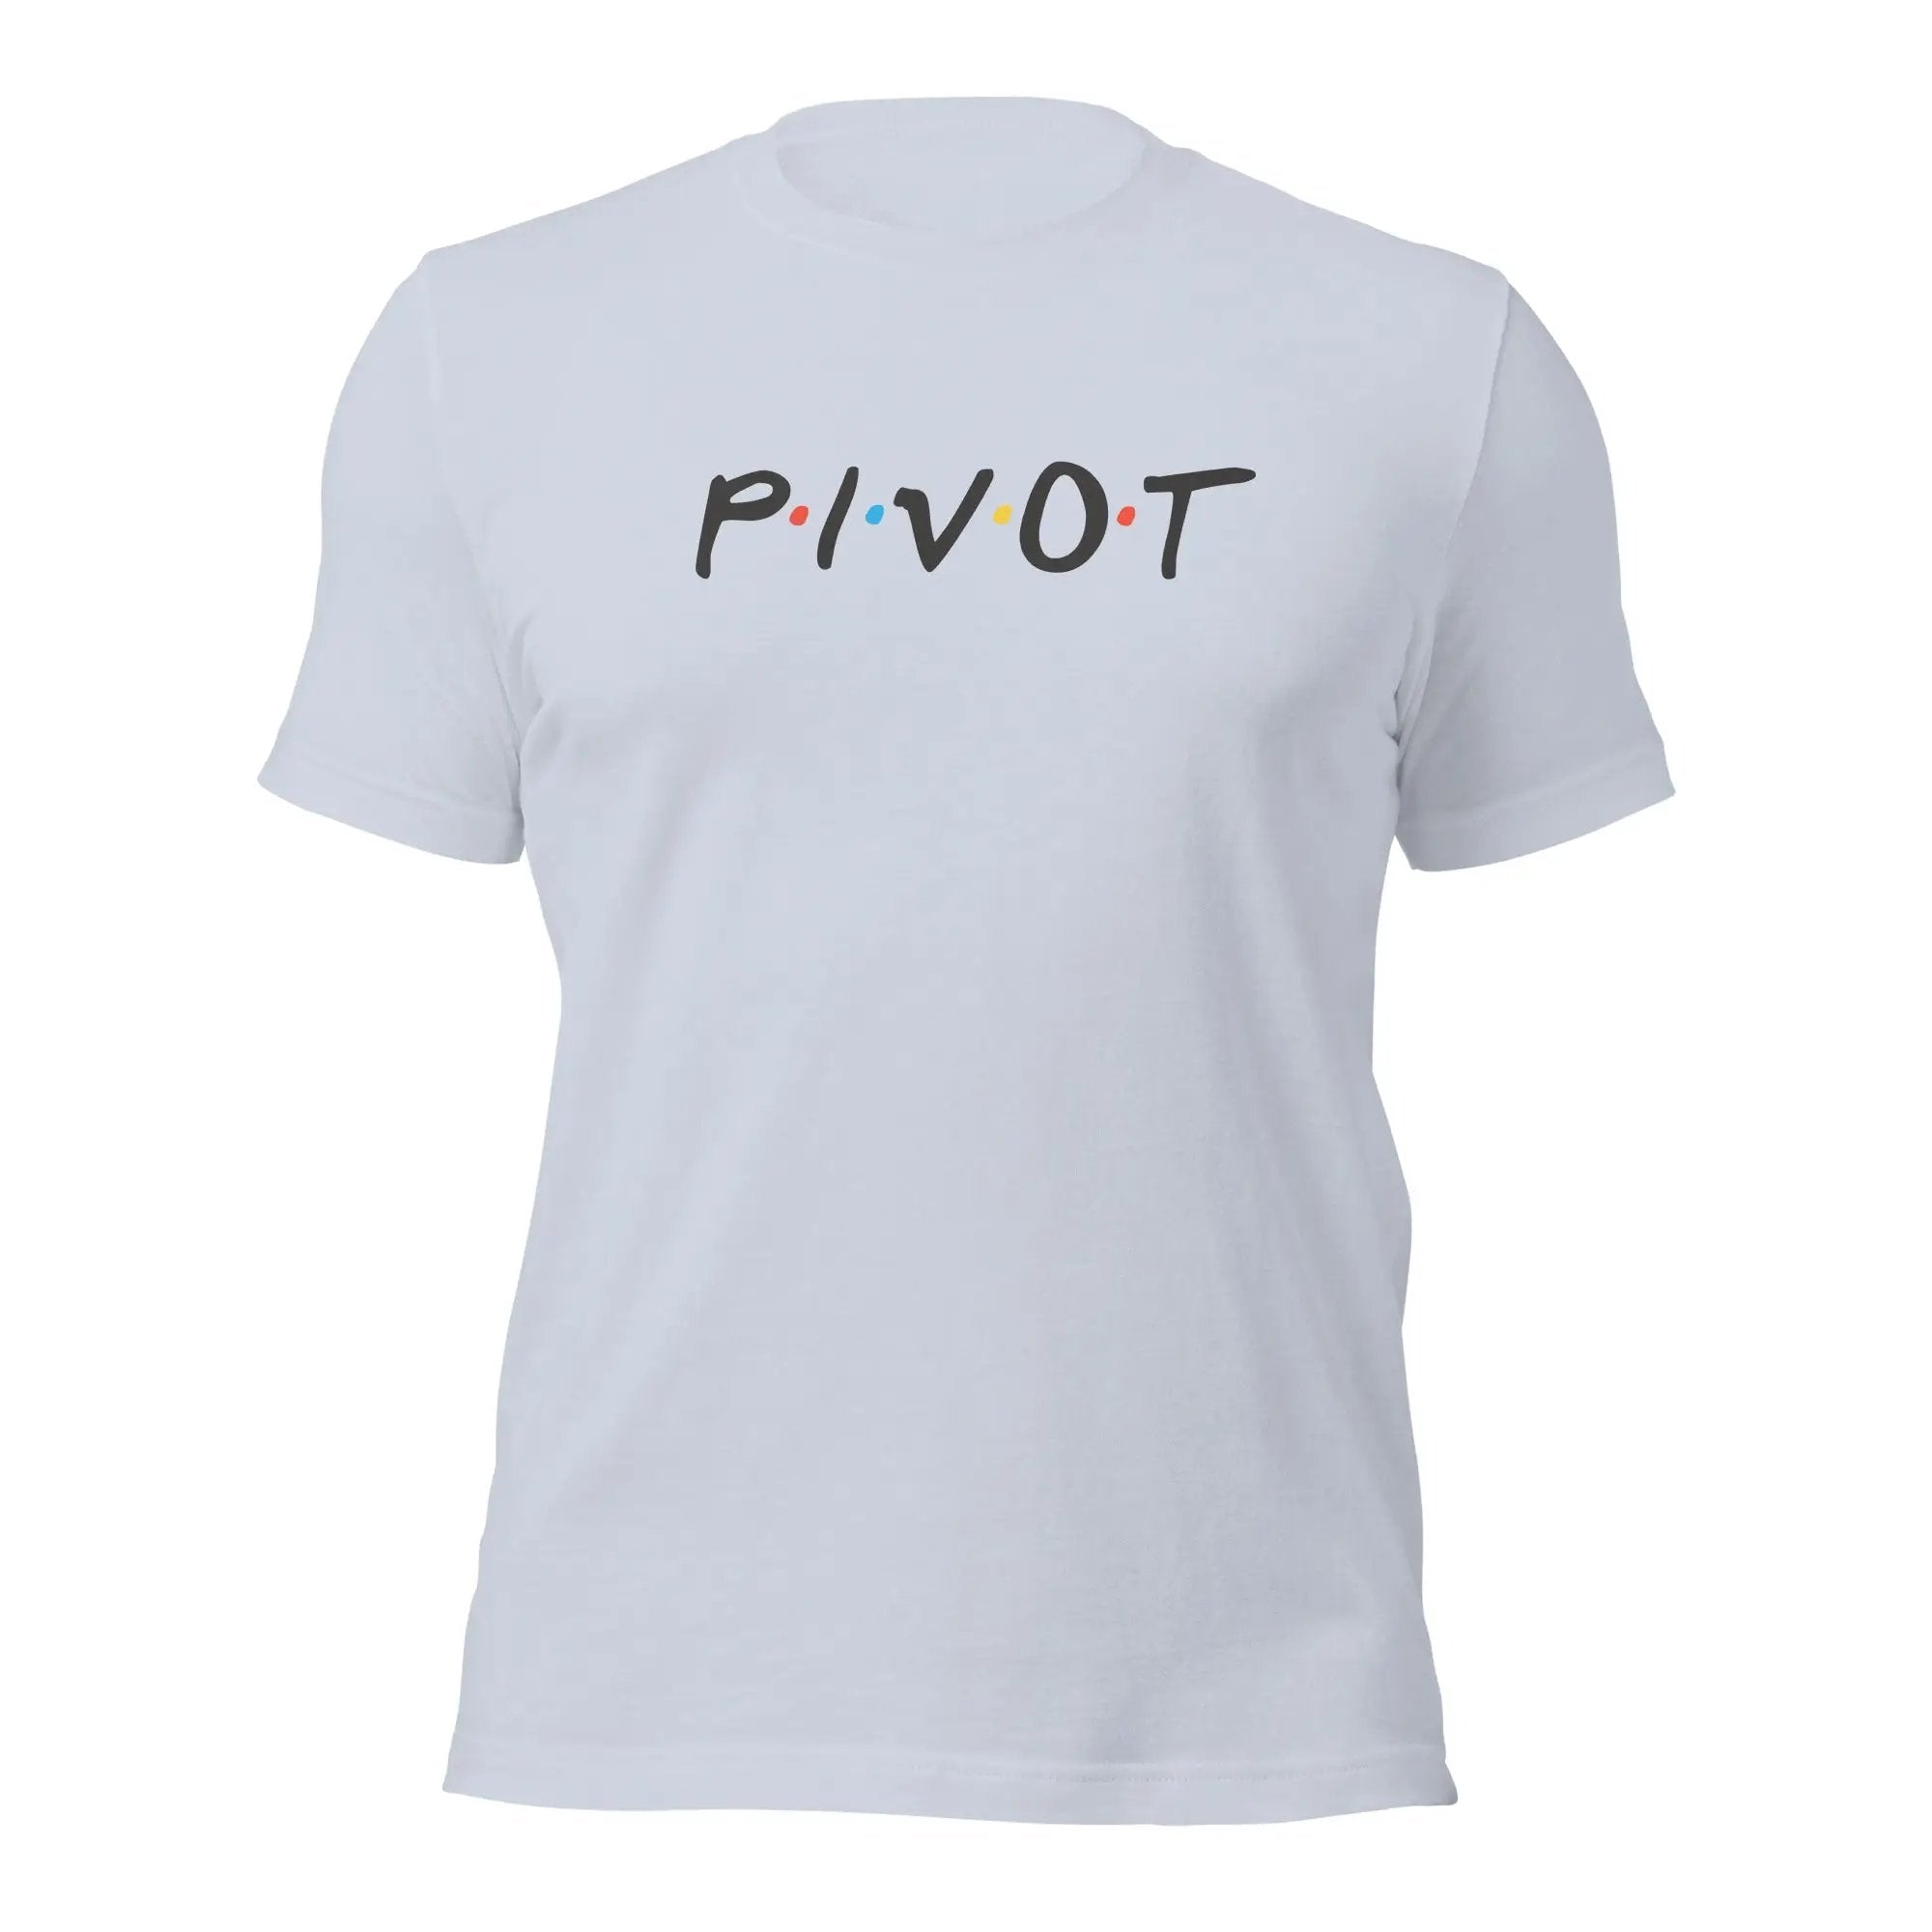 a white t - shirt with the word pivot printed on it